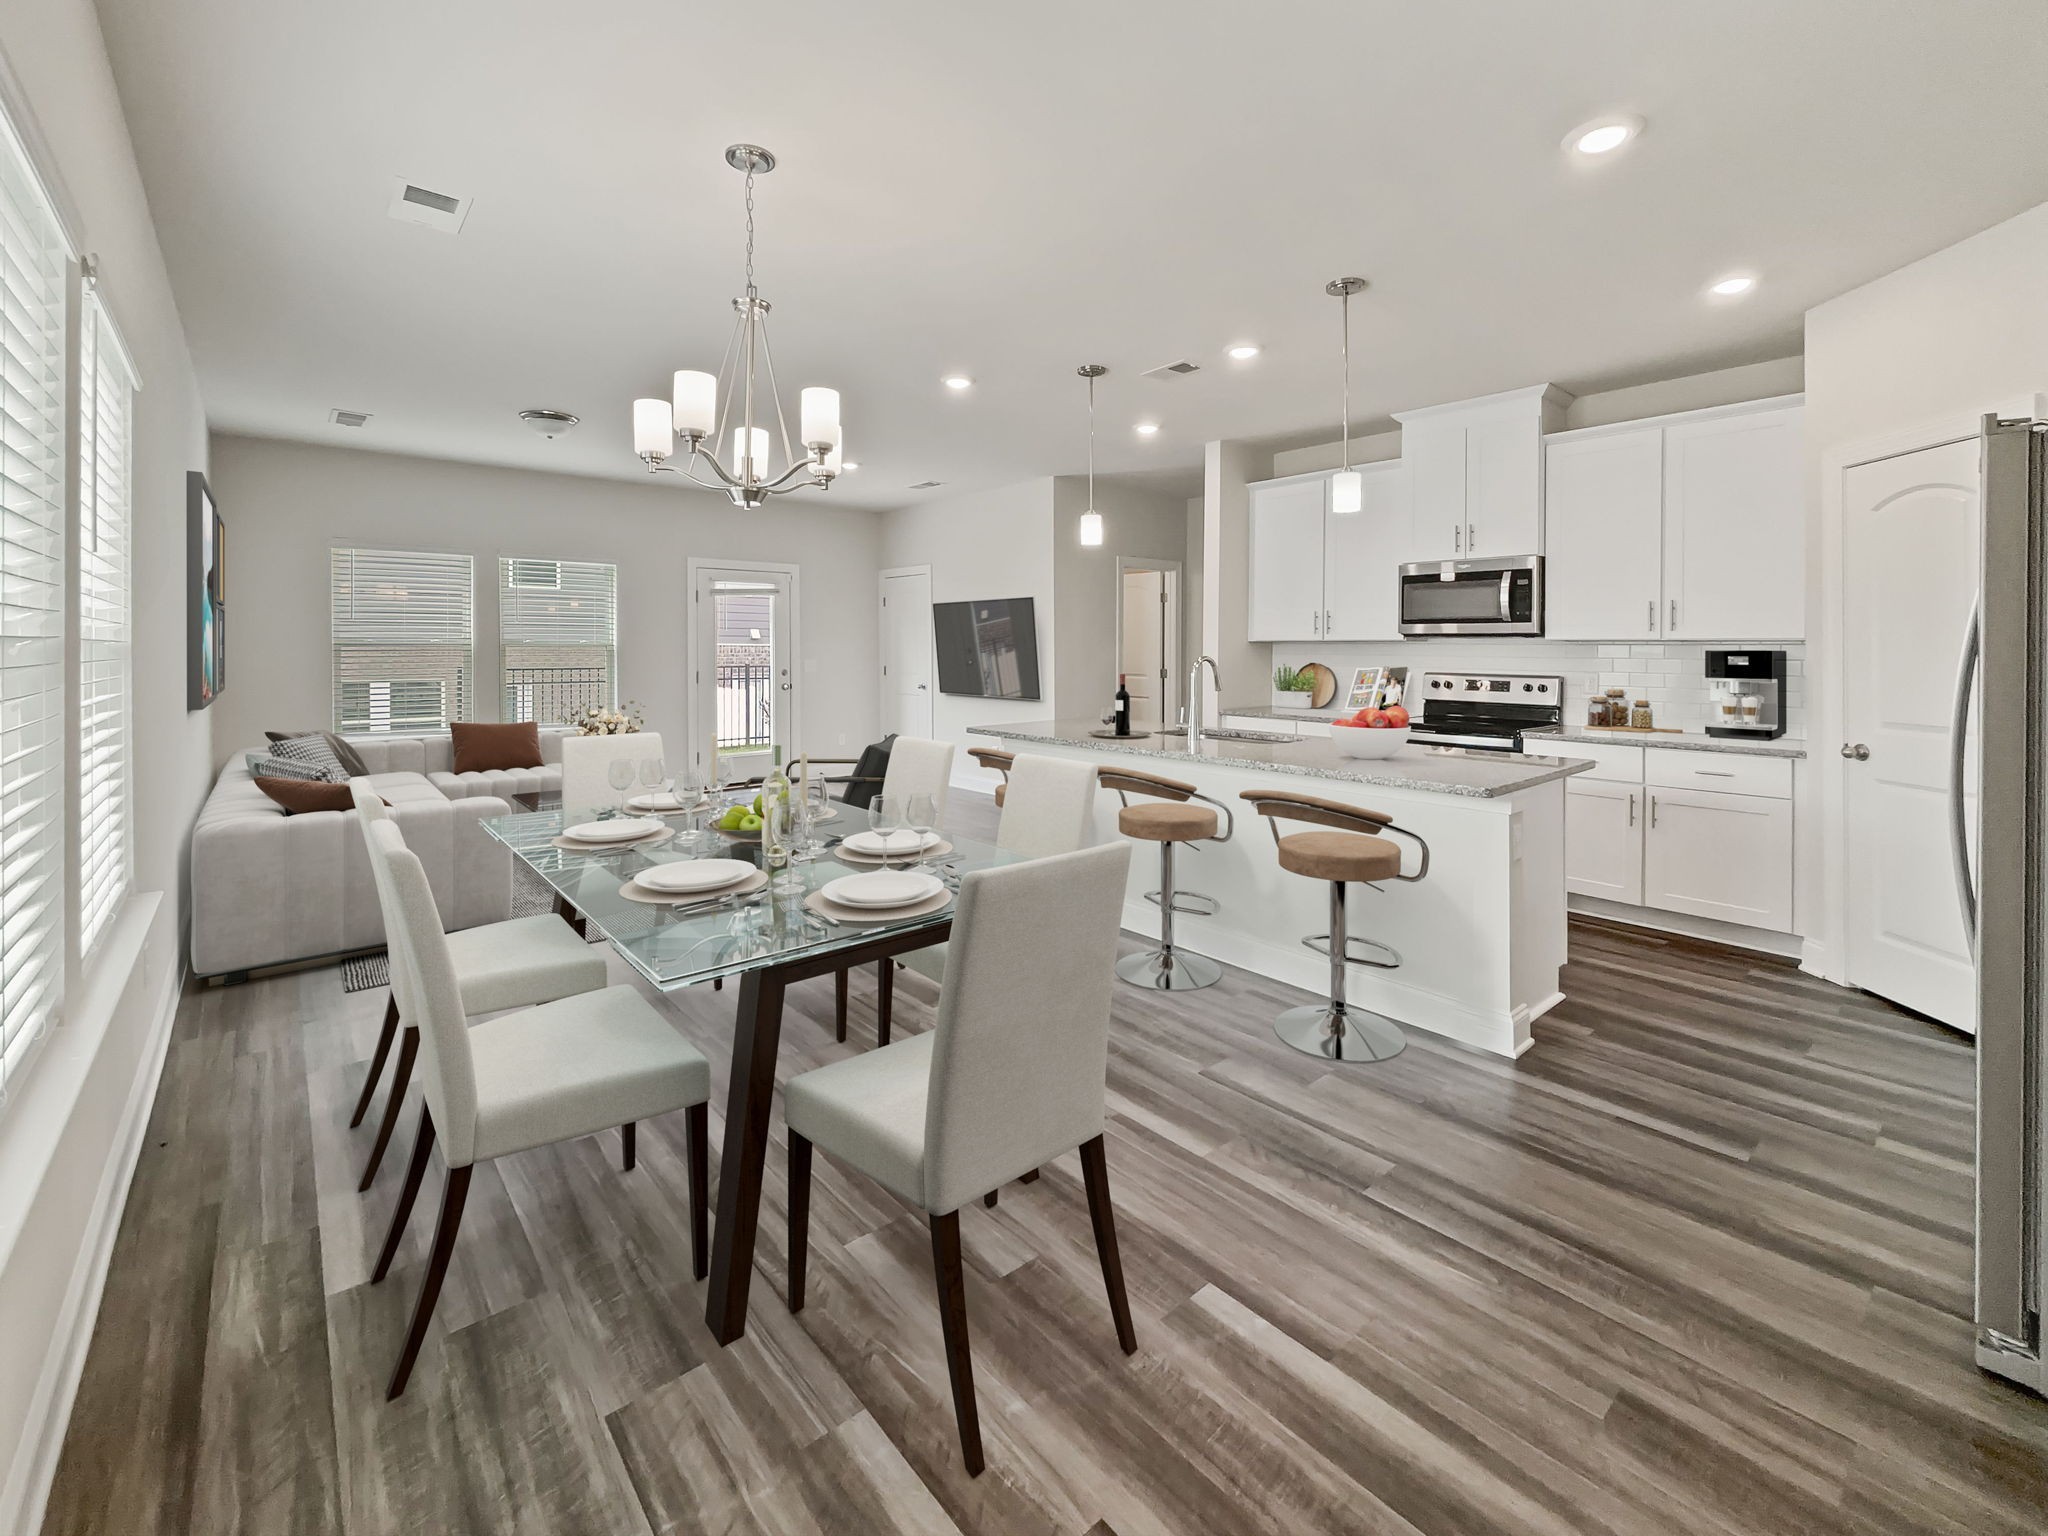 a large kitchen with cabinets wooden floor white stainless steel appliances and dining table